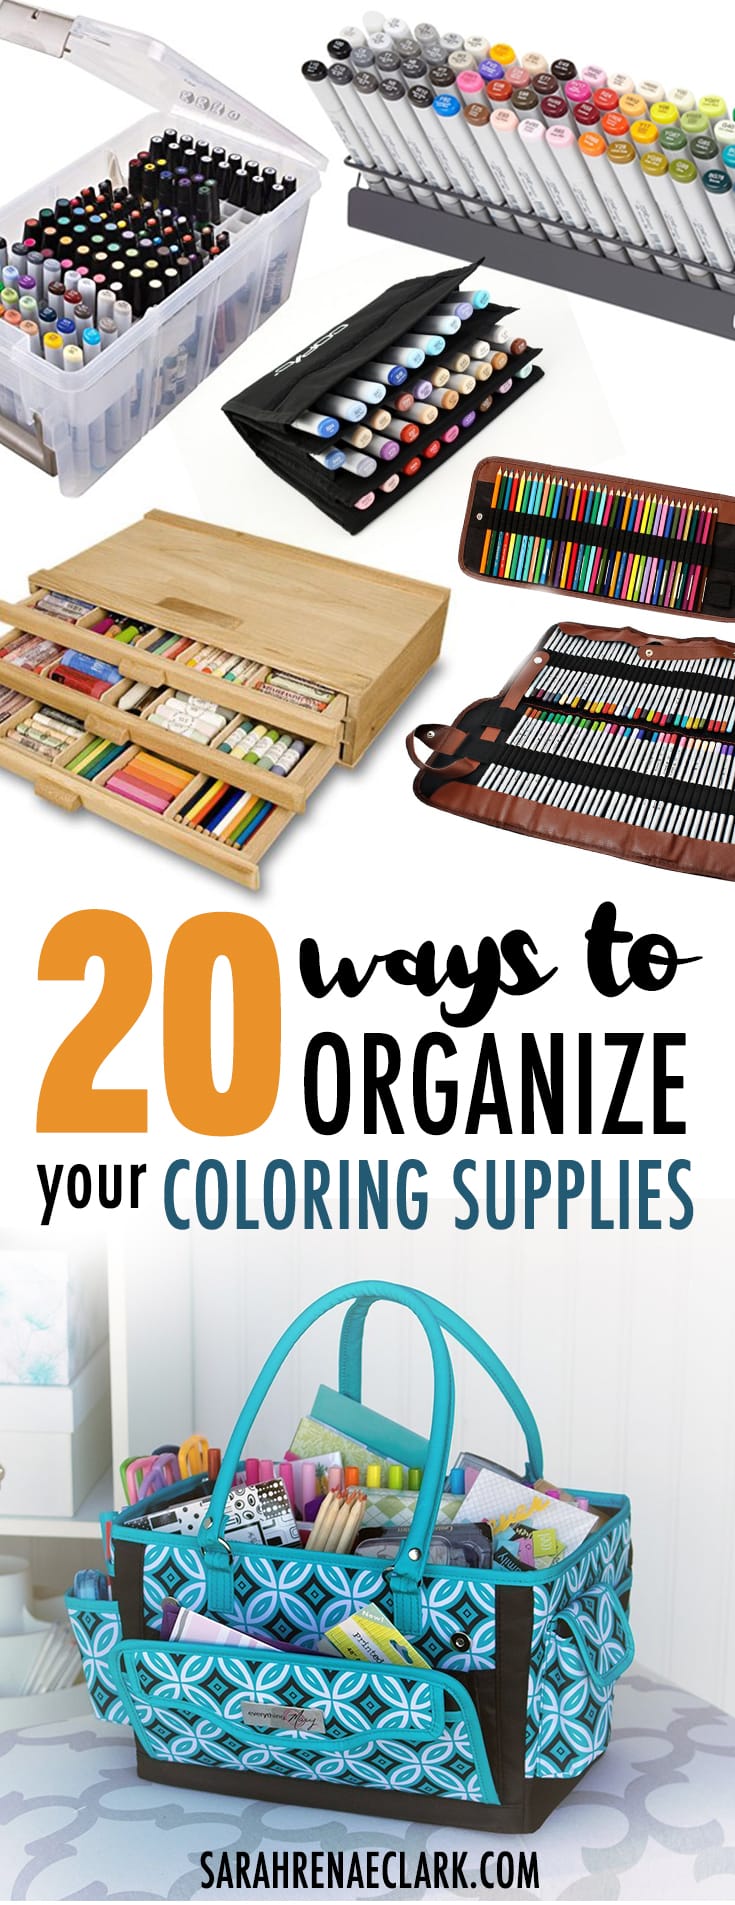 20 Clever Ways to Organize Your Coloring Supplies